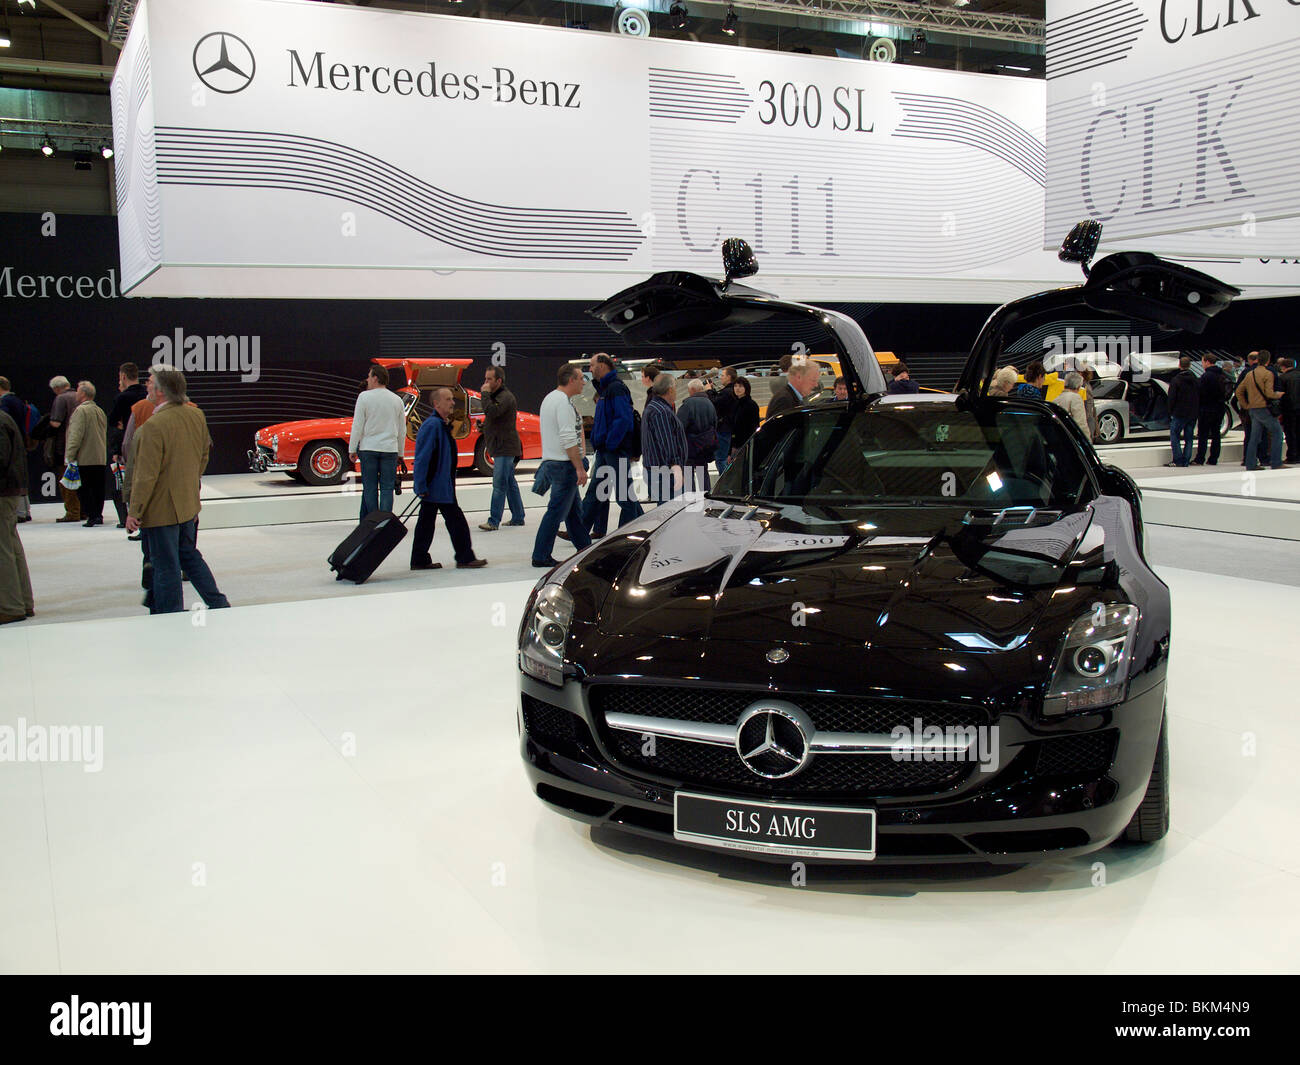 The new SLS AMG gullwing Mercedes on display at Techno Classica in Essen, Germany with red 300SL in the background. Stock Photo